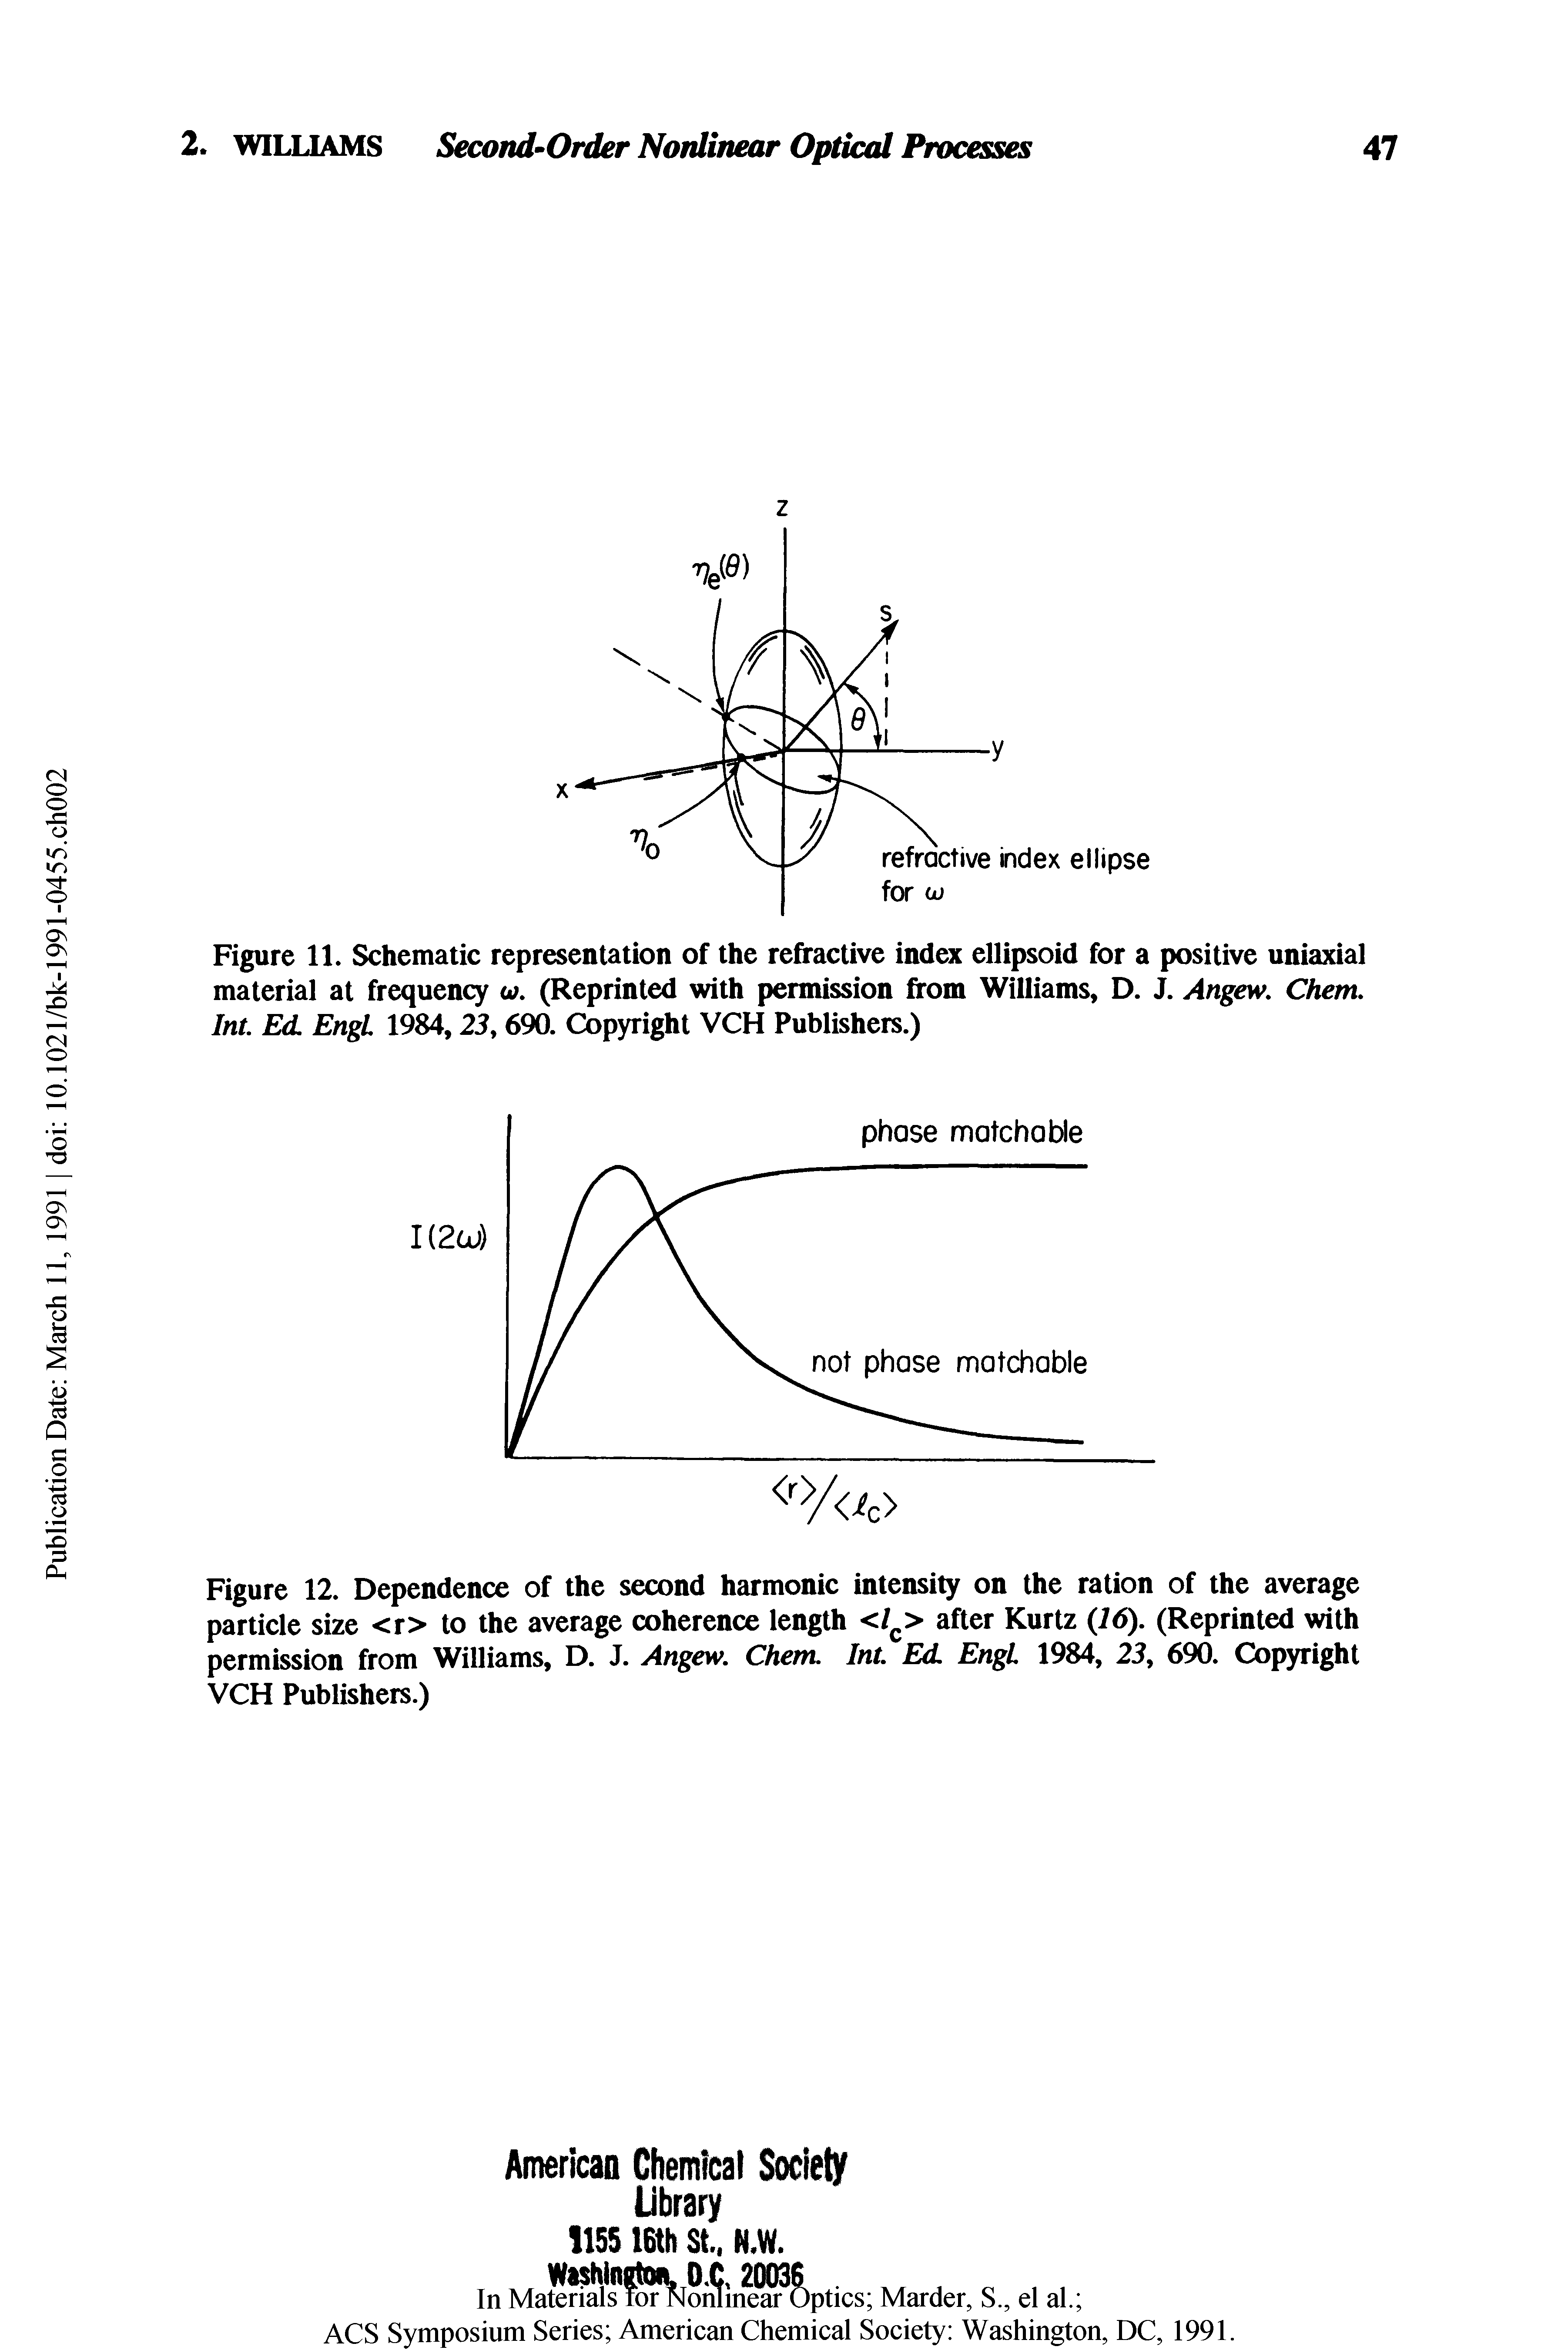 Figure 12. Dependence of the second harmonic intensity on the ration of the average particle size <r> to the average coherence length <lQ> after Kurtz (16). (Reprinted with permission from Williams, D. J. Angew. Chem. Int. Ed. Engl 1984, 23, 690. Copyright VCH Publishers.)...